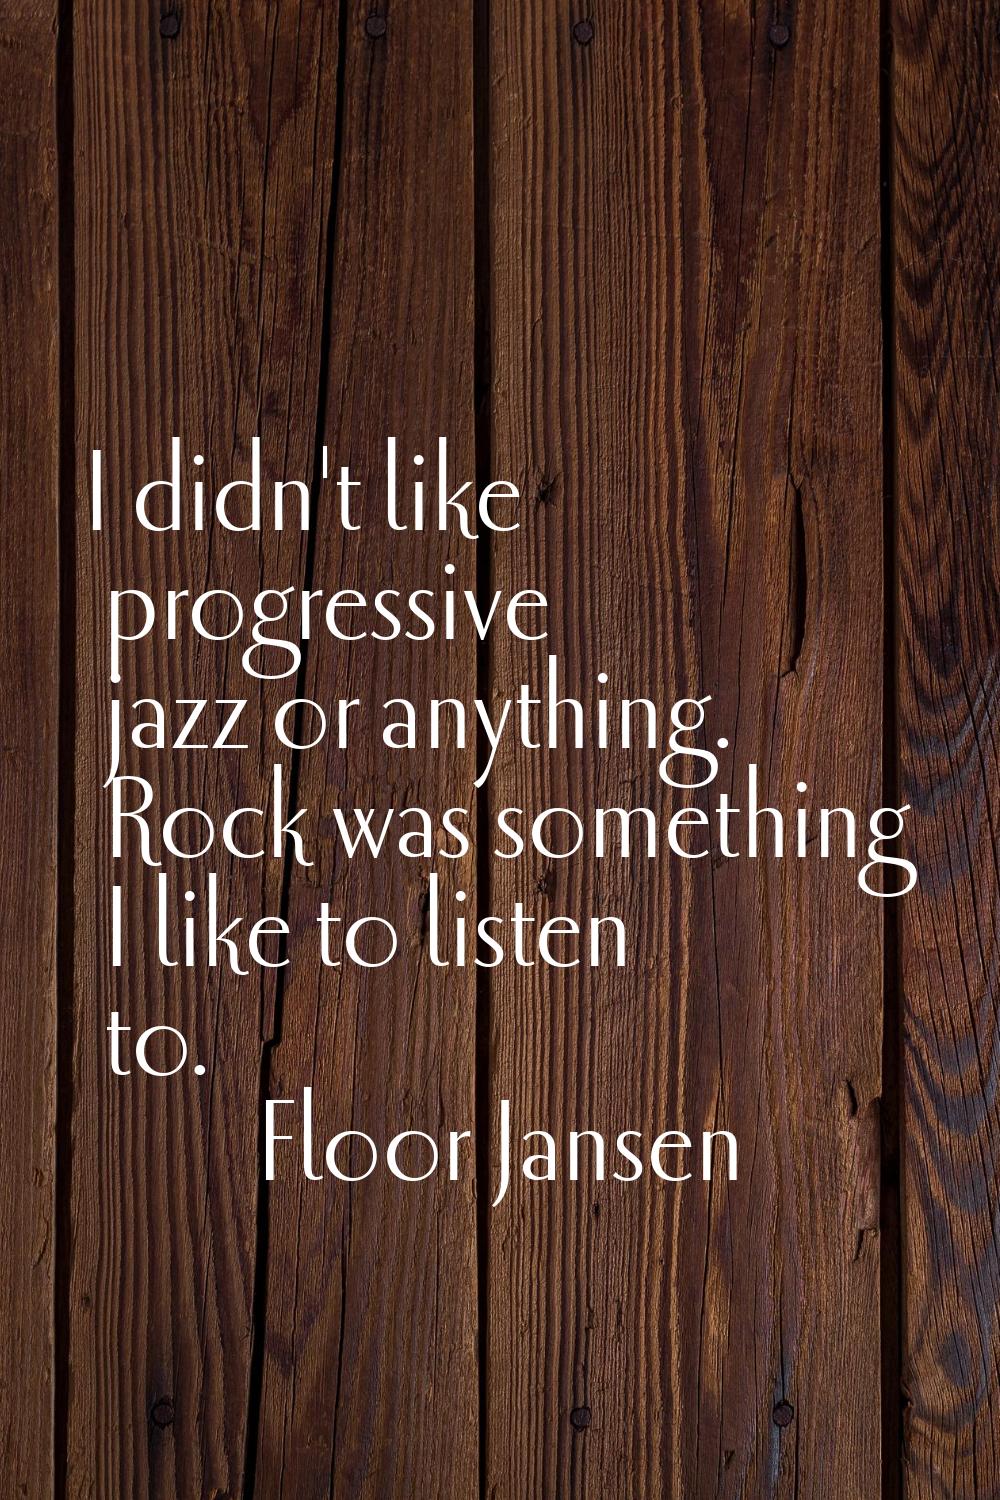 I didn't like progressive jazz or anything. Rock was something I like to listen to.